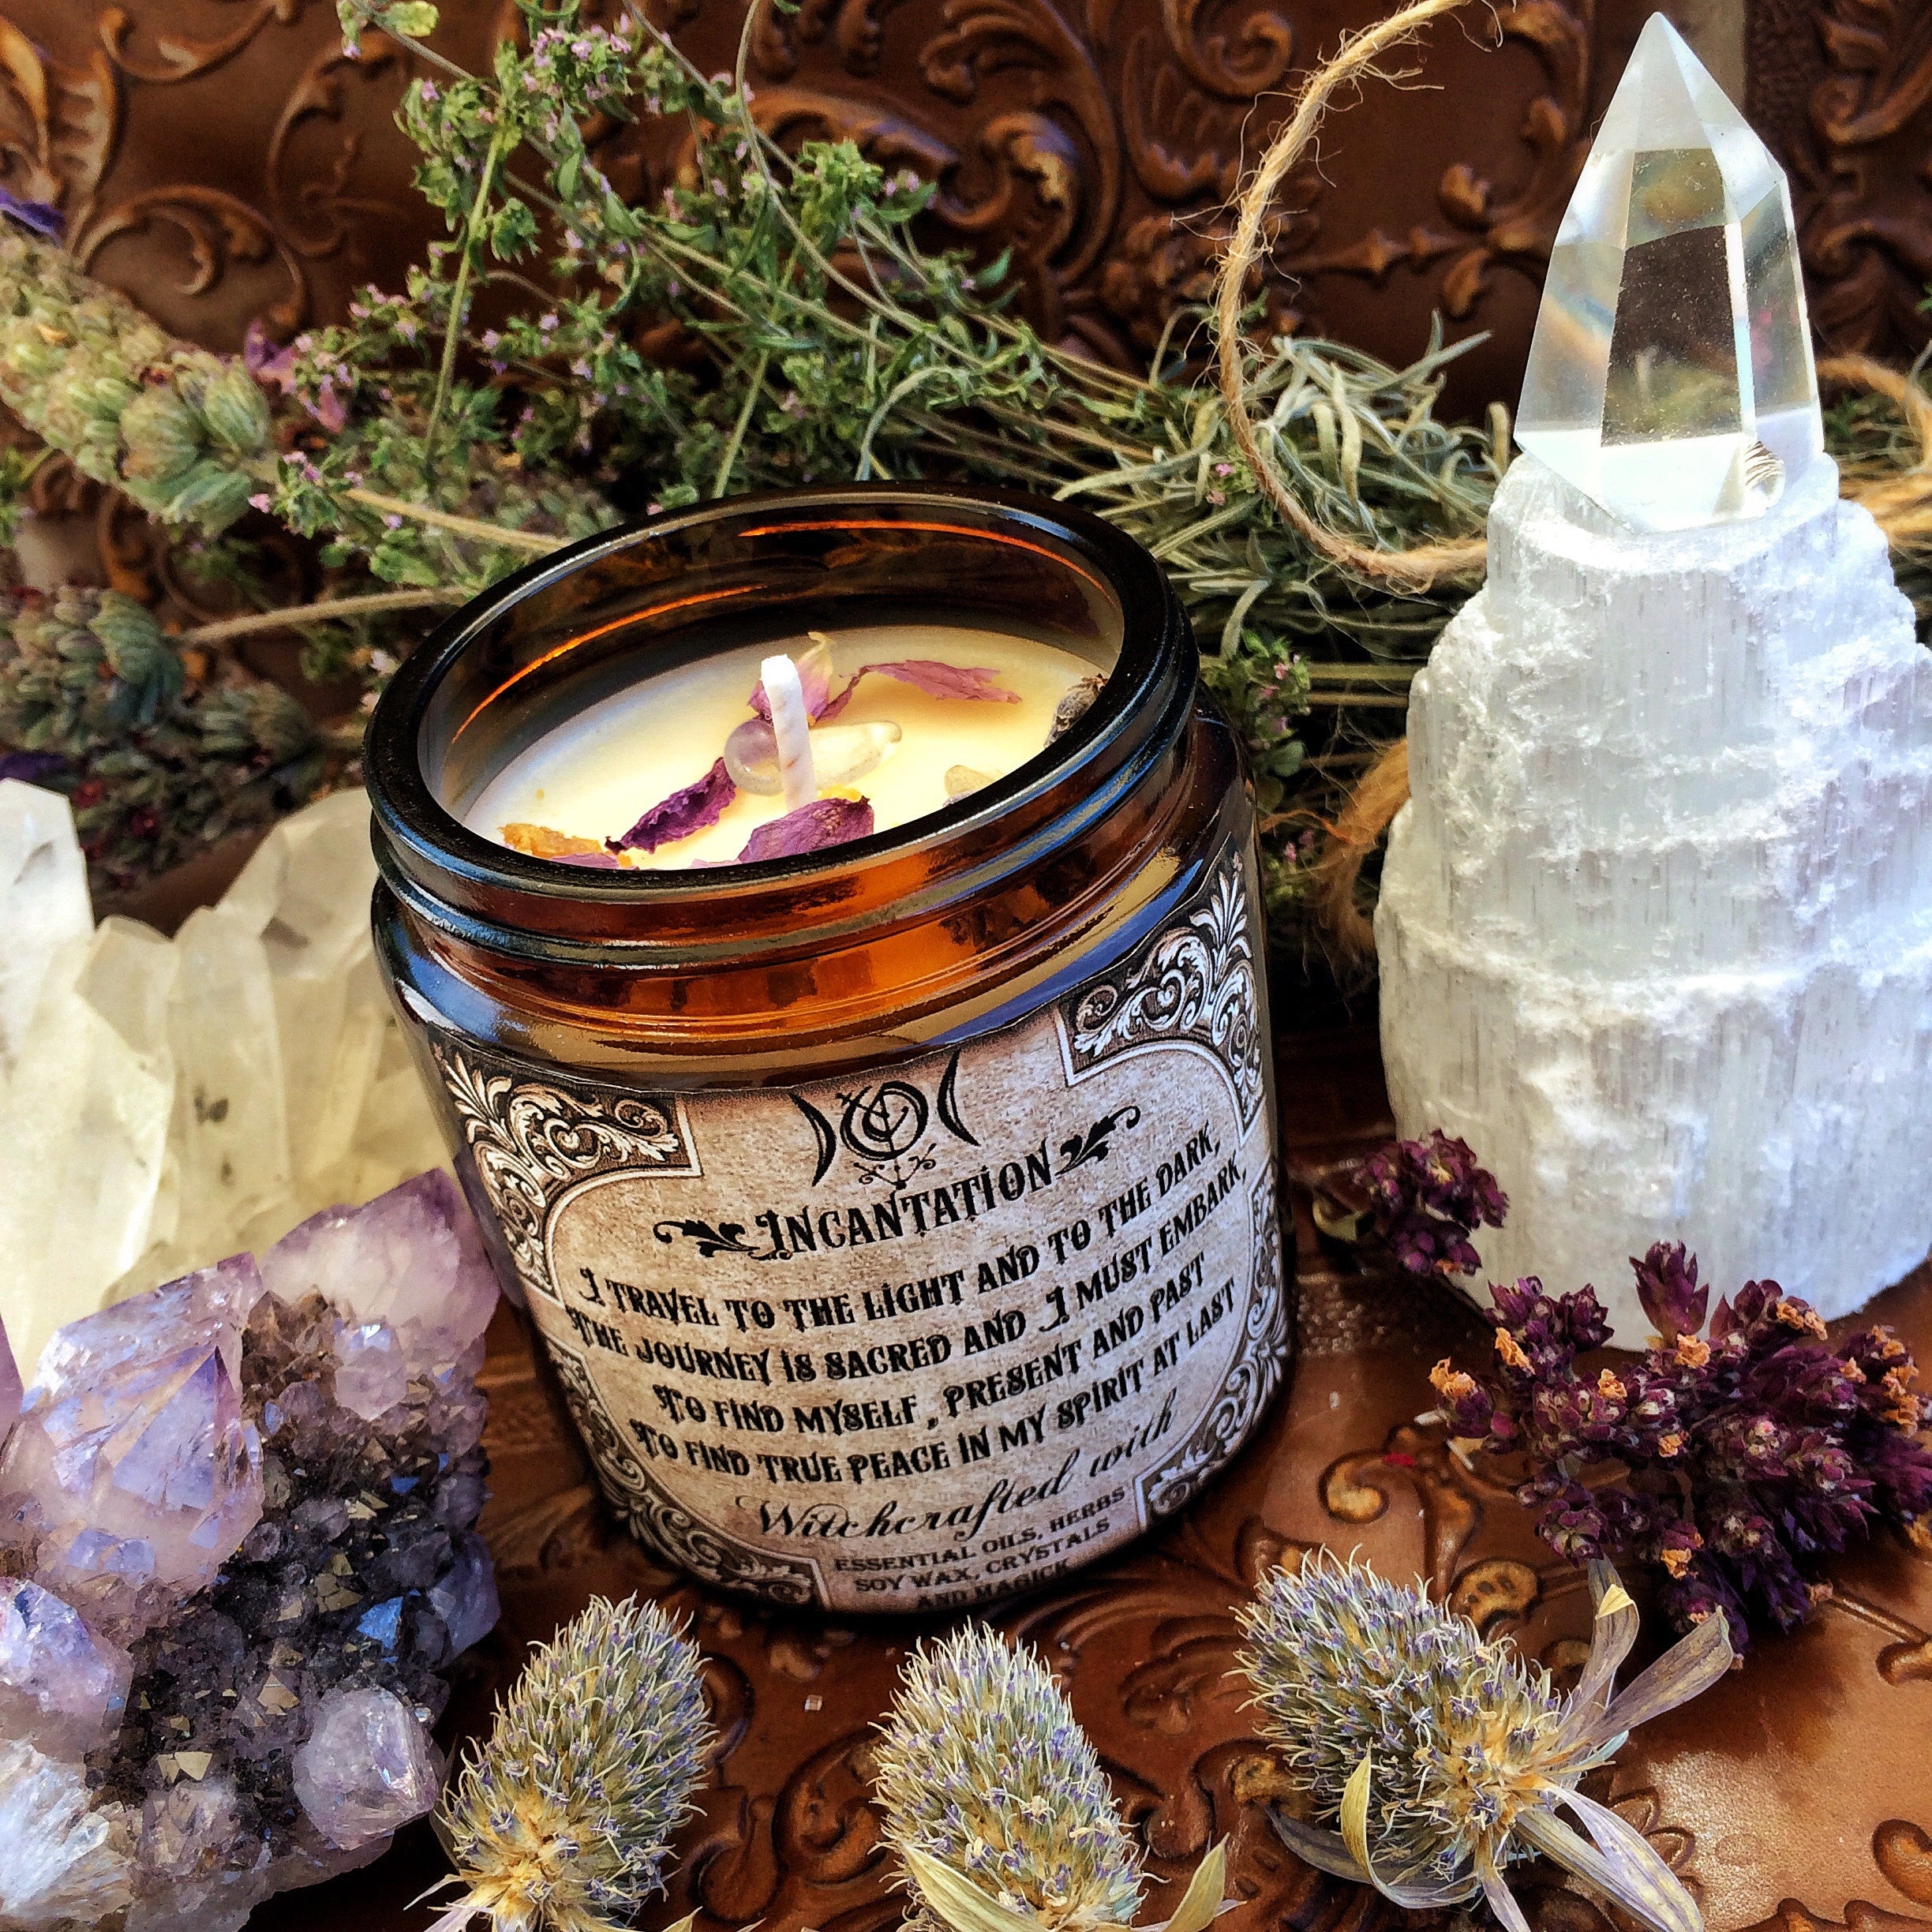 Meditation Candle ~ WitchCrafted and Blessed by the Moon ~ Blue Lotus ~ Frankincense~ Meditation ~ Spiritual Journey ~ 4oz ~30 hour - Moon Goddess Magick Apothecary 